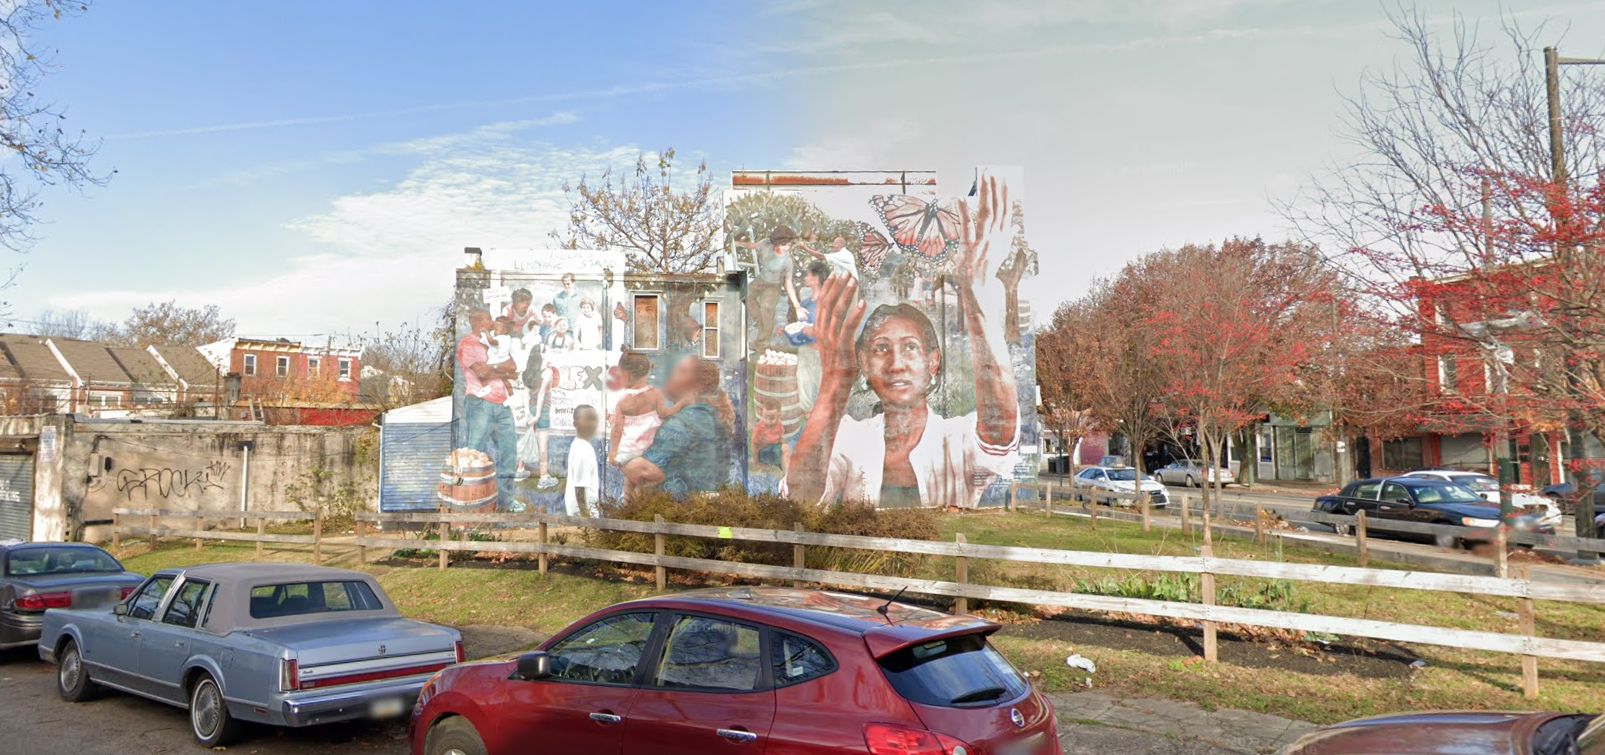 Mural at 4328 Lancaster Avenue prior to redevelopment. Looking northwest. November 2020. Credit: Google Maps